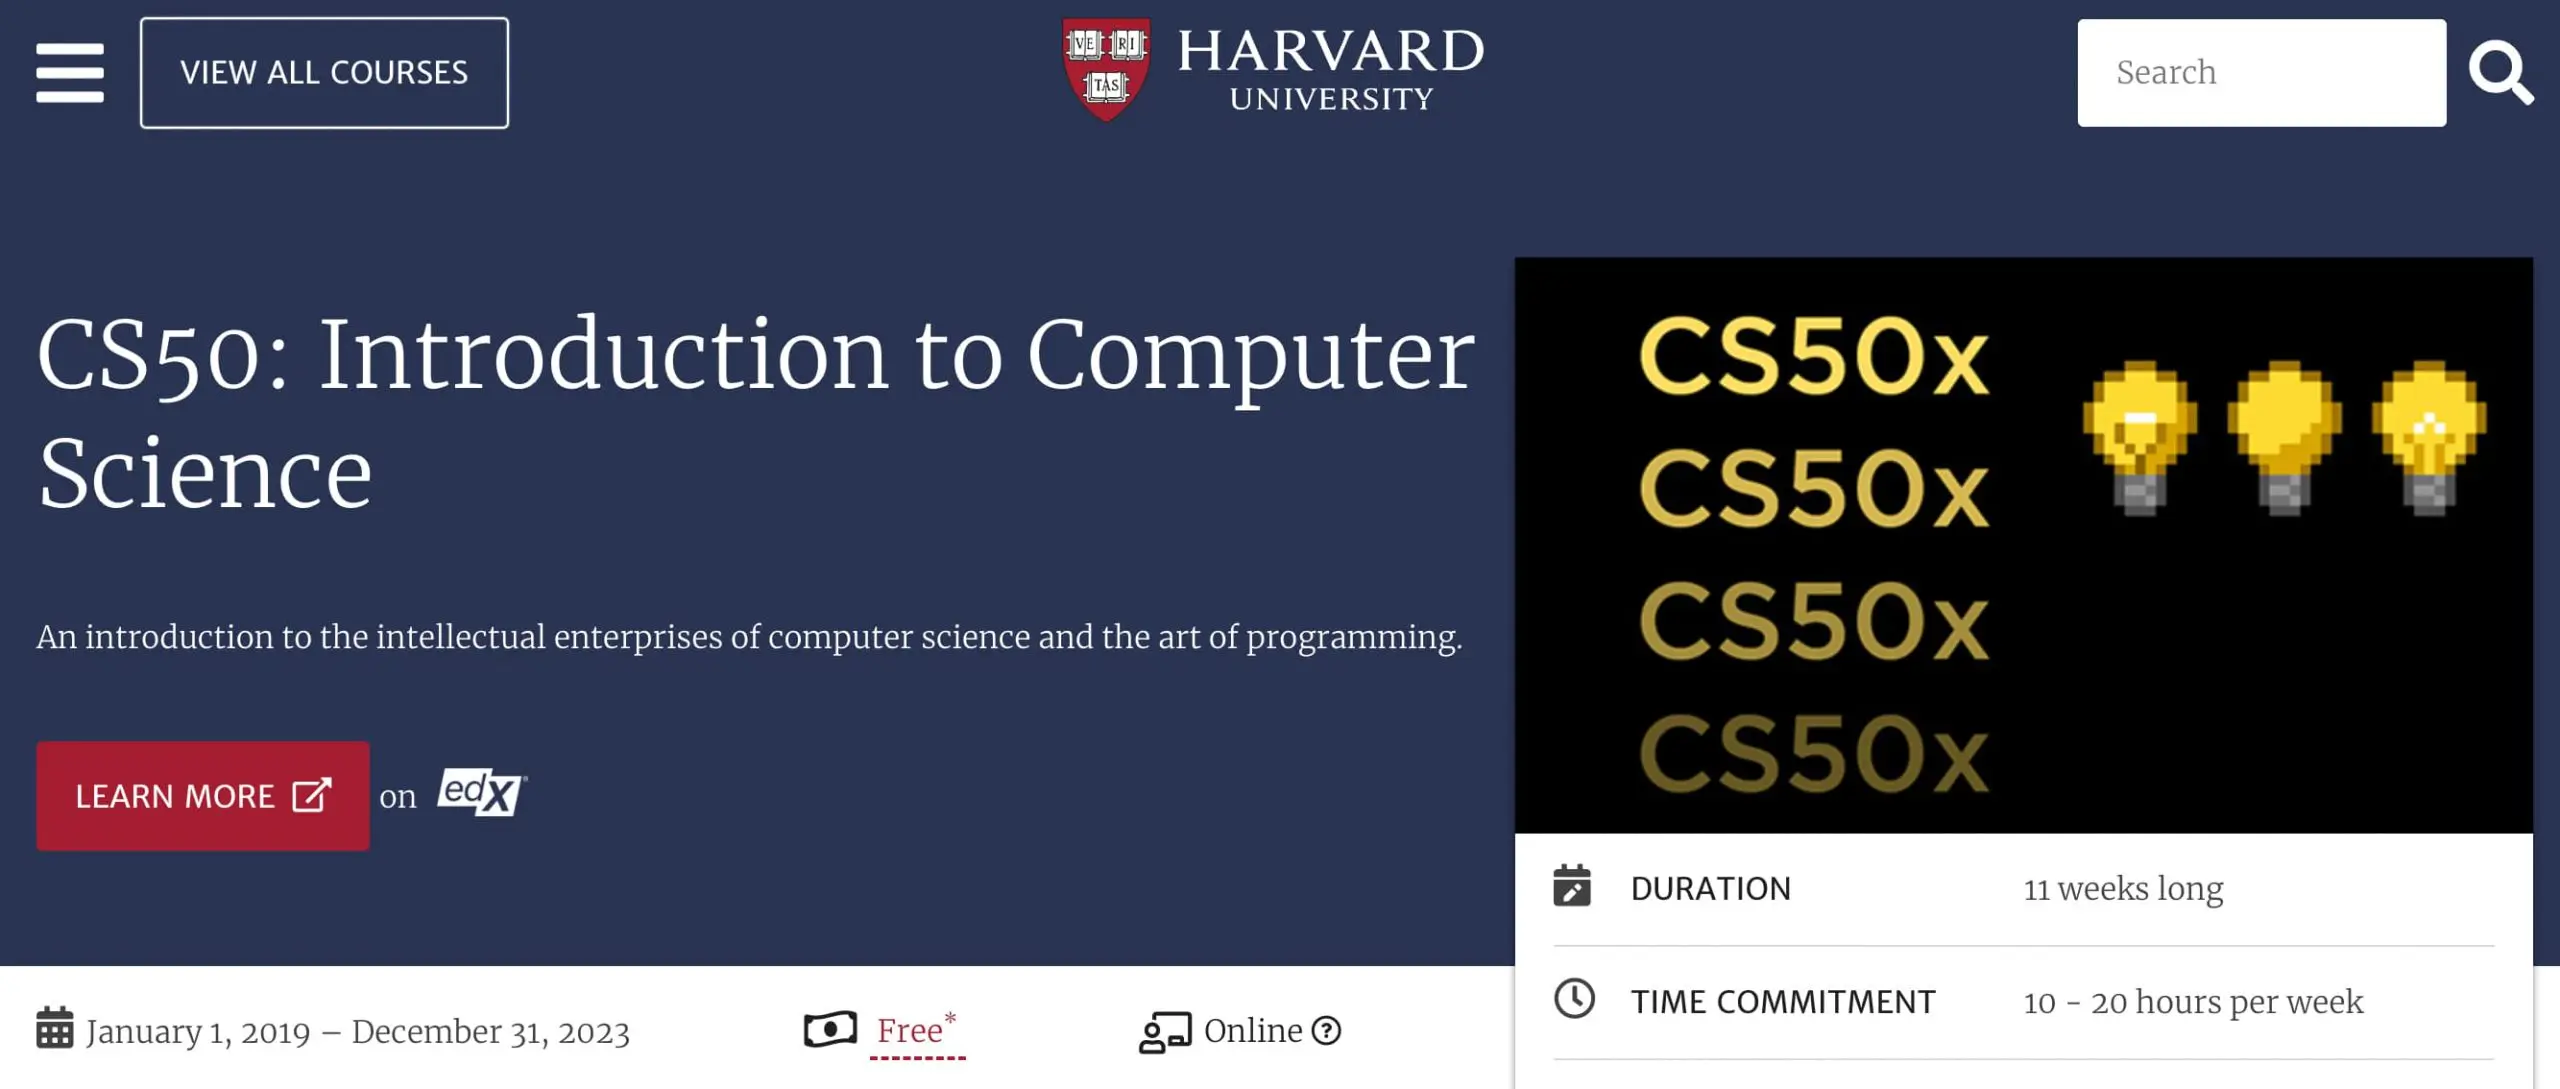 a screenshot from Harvard's website of the free online course, introduction to computer science